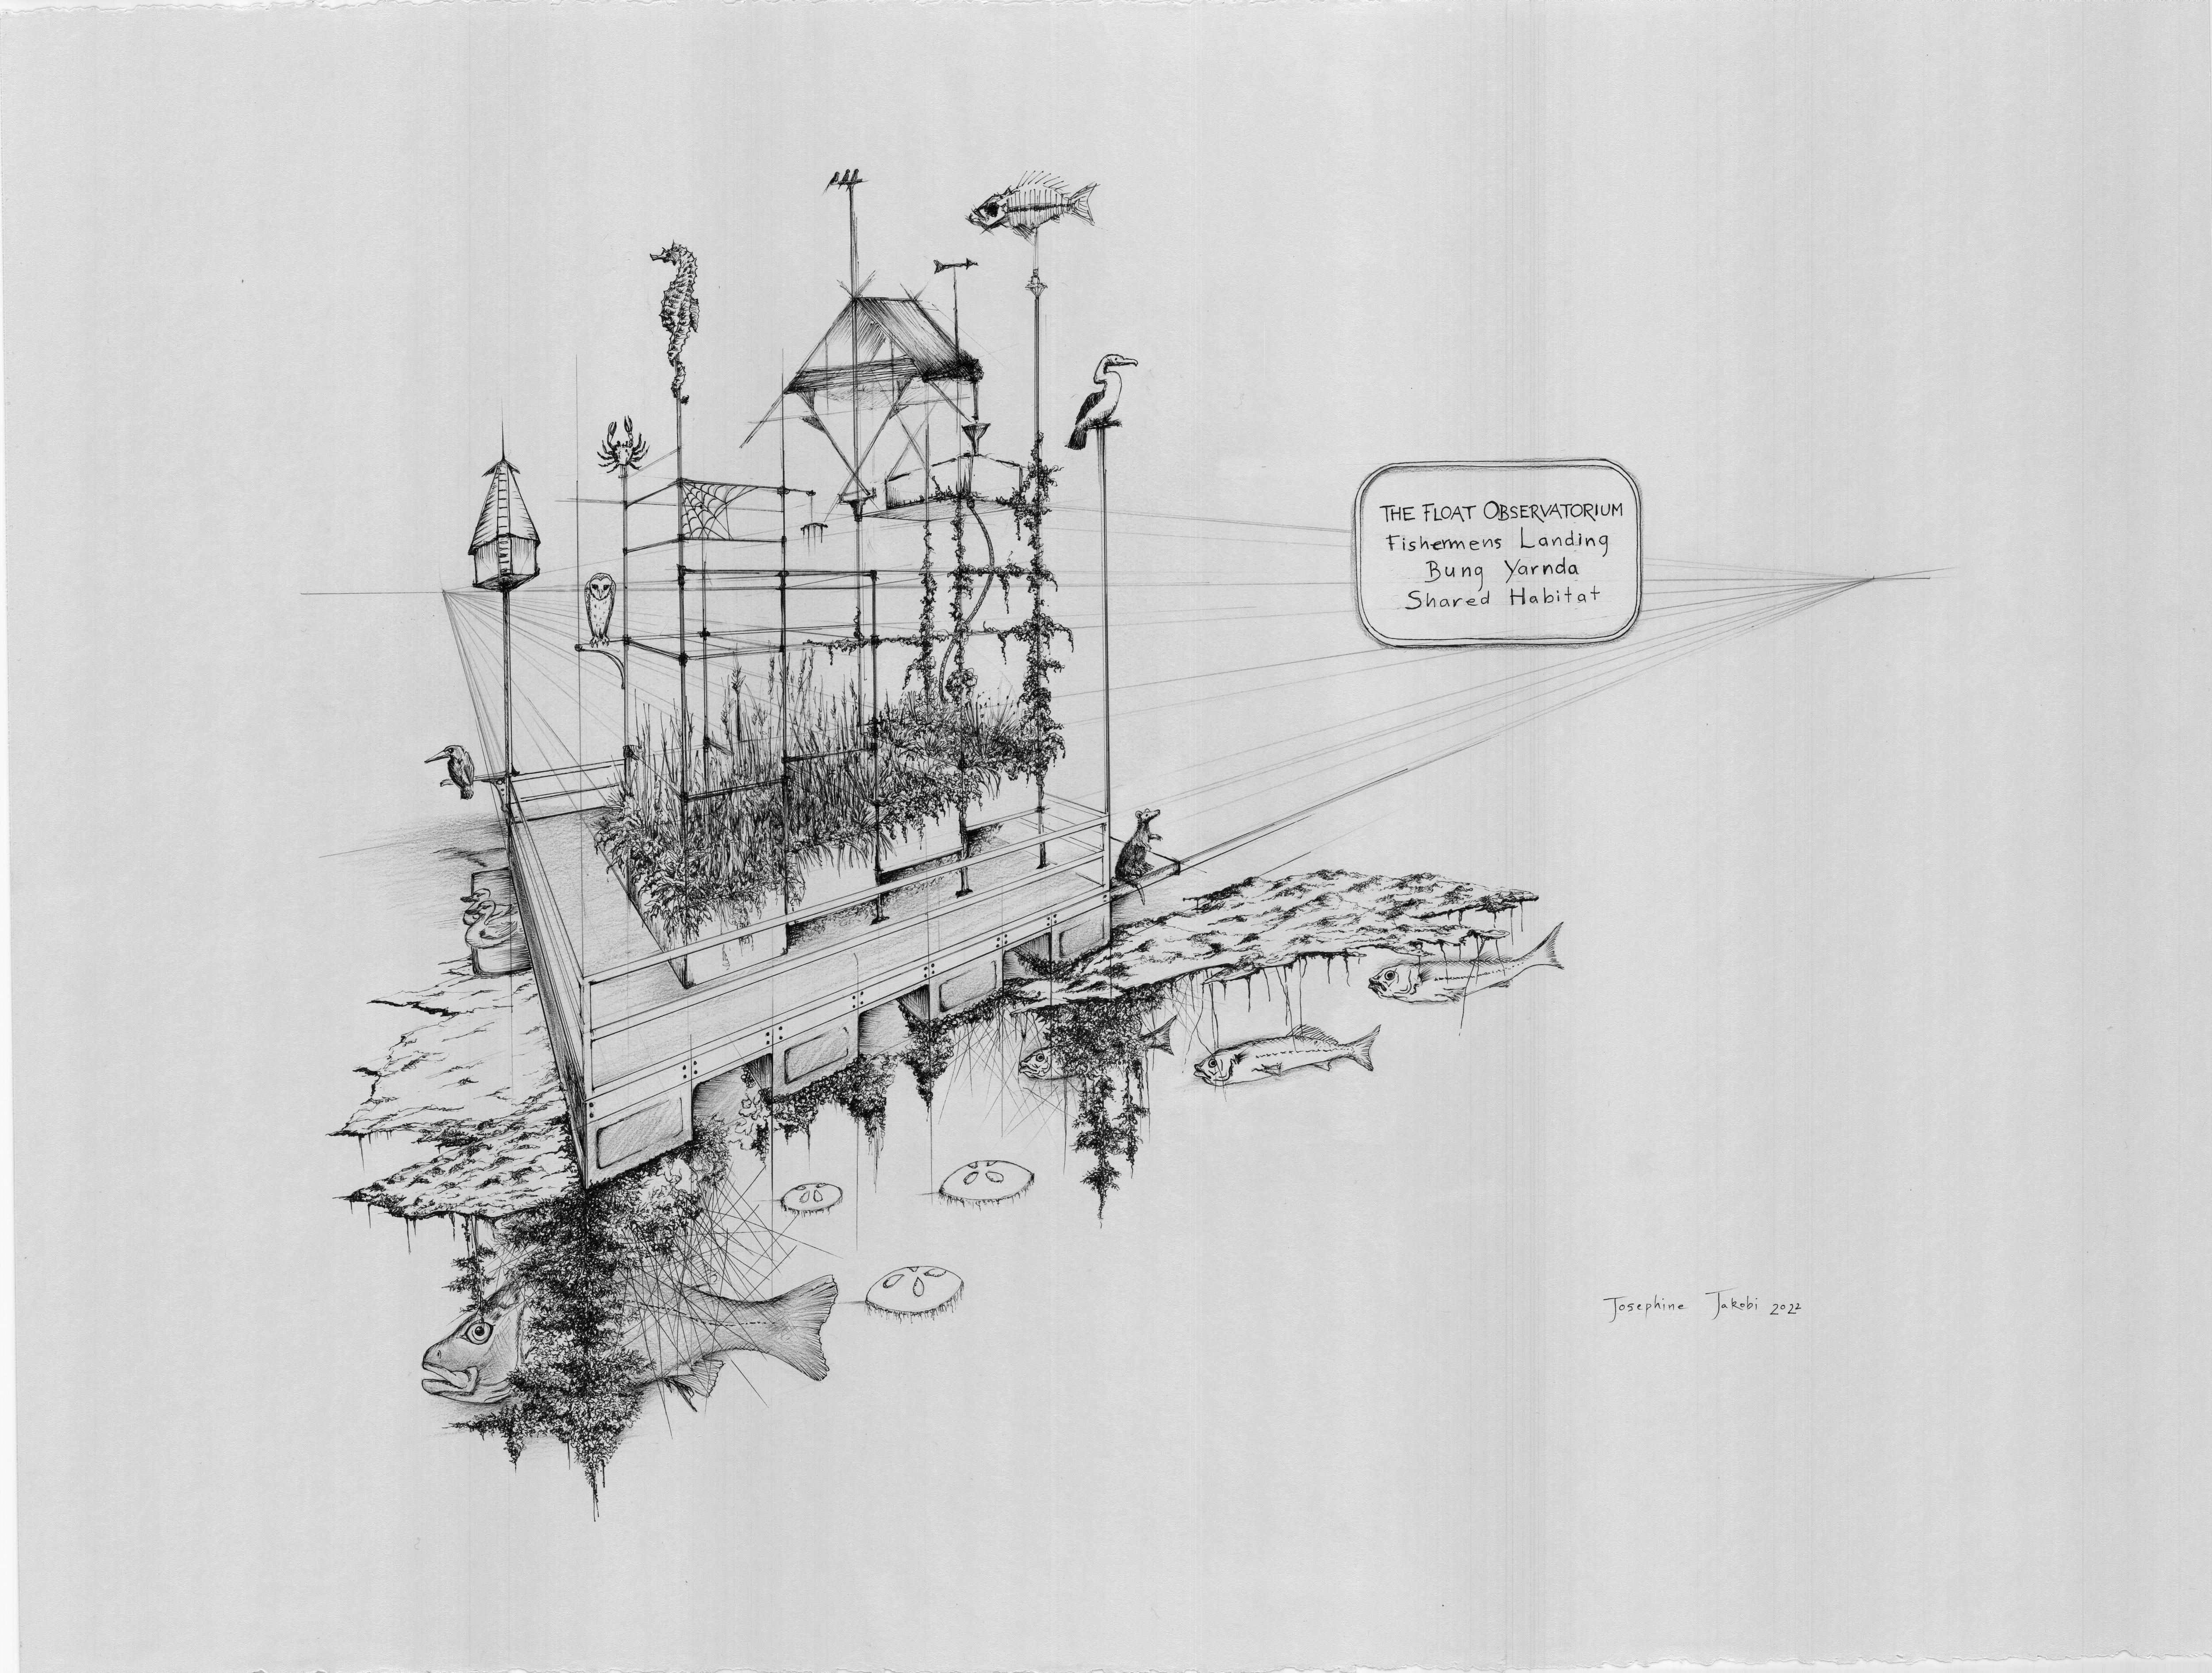 Sketch of water pontoon with protruding scafolding and marine sculpture totems.